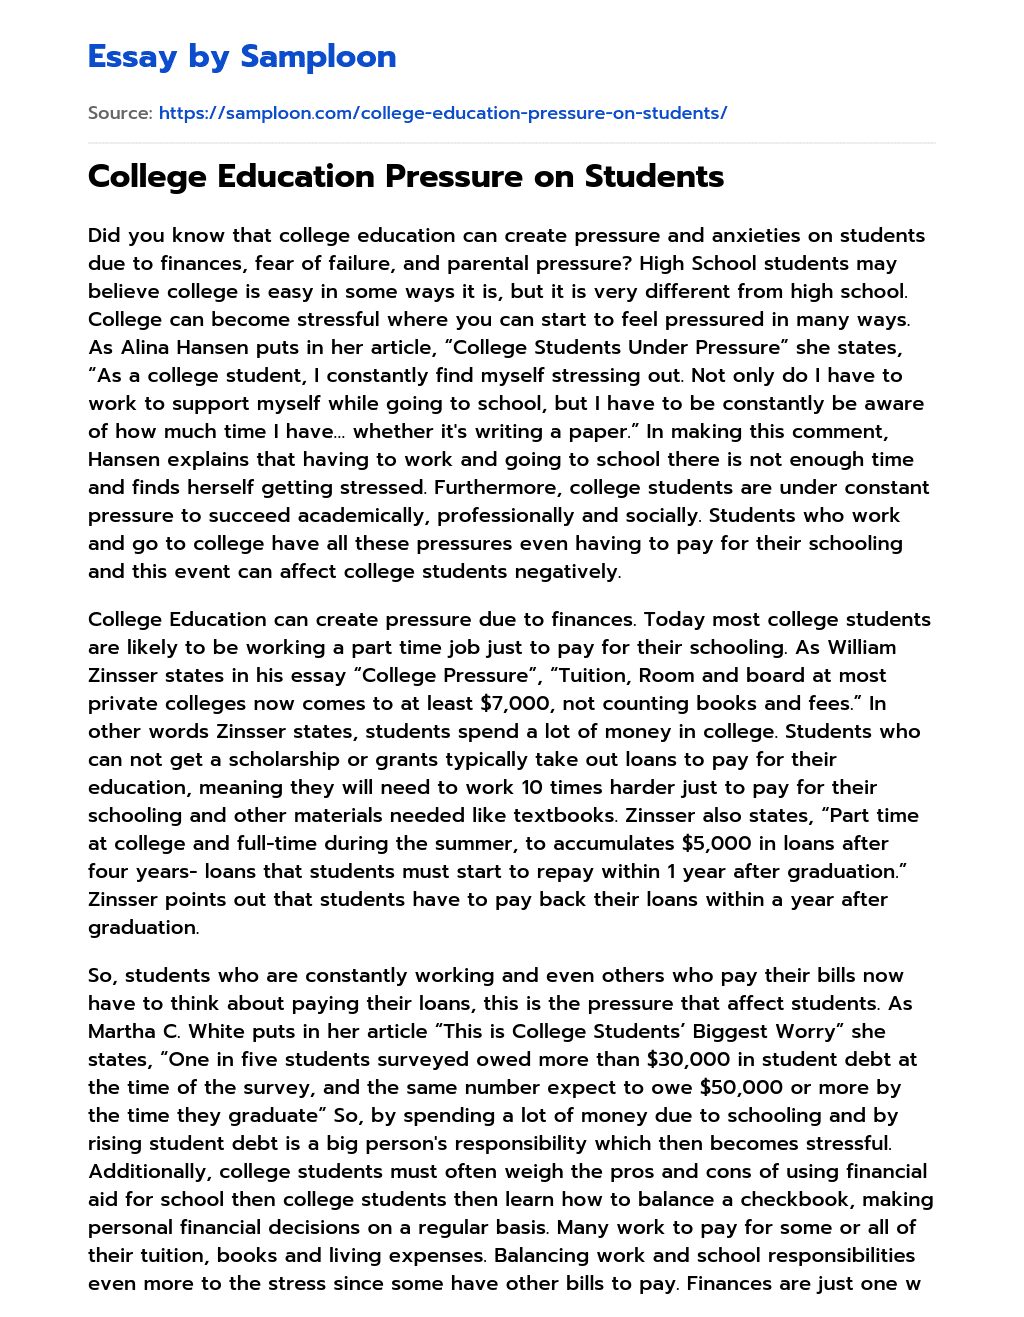 College Education Pressure on Students essay